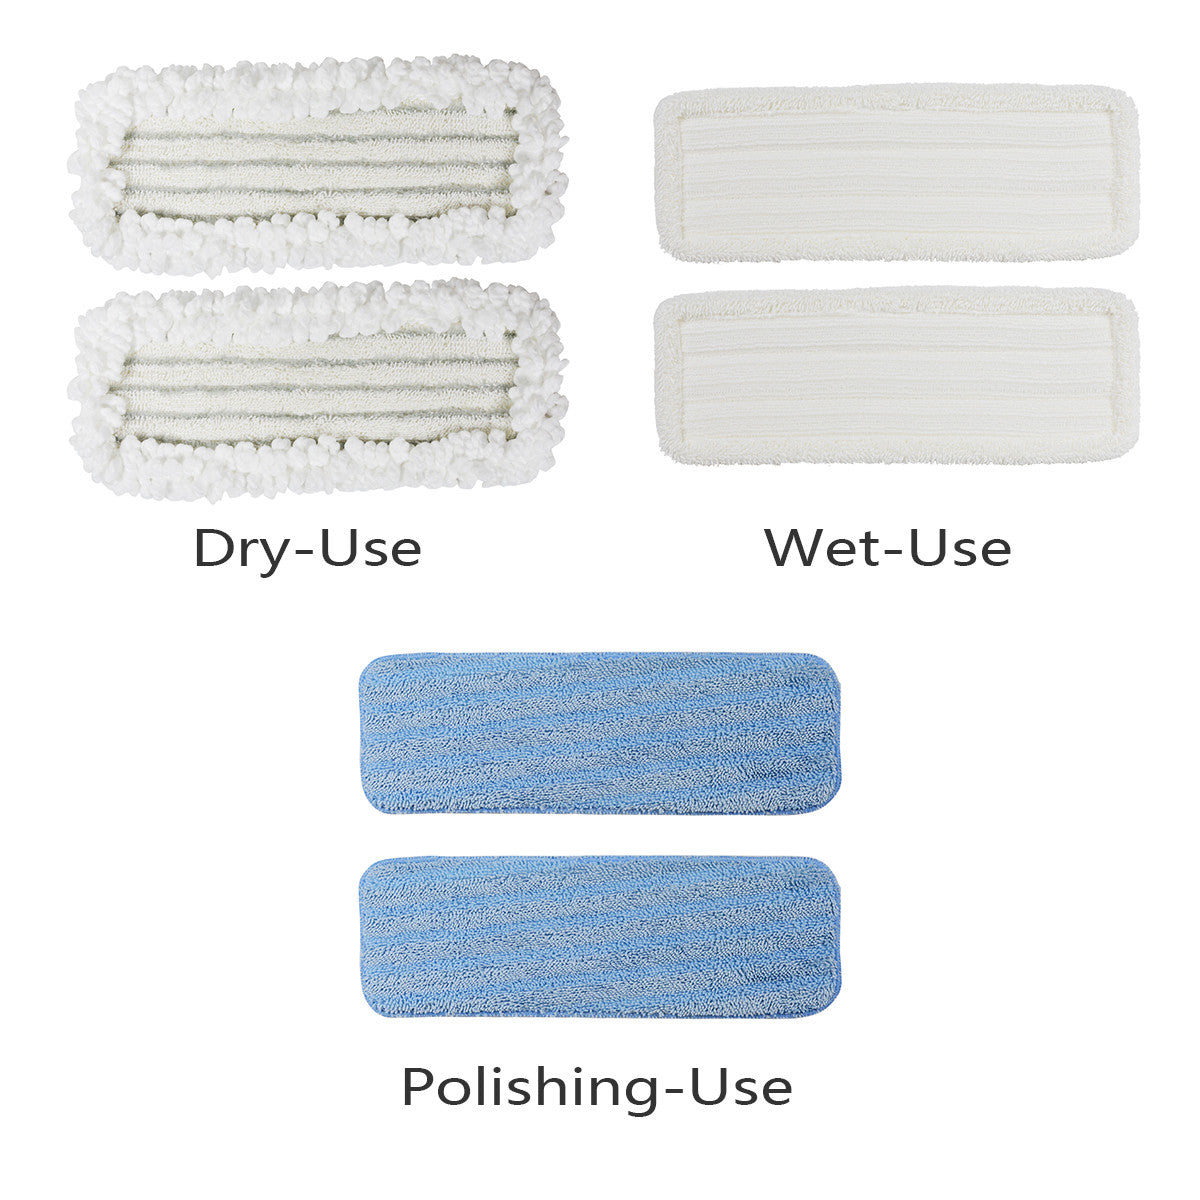 Le Coucou SCD1-MP Refill Replacement for SC-D1 Vibration Mop Complete Wet, Dry, Polish Mop Head Variety Pads (3 pack)